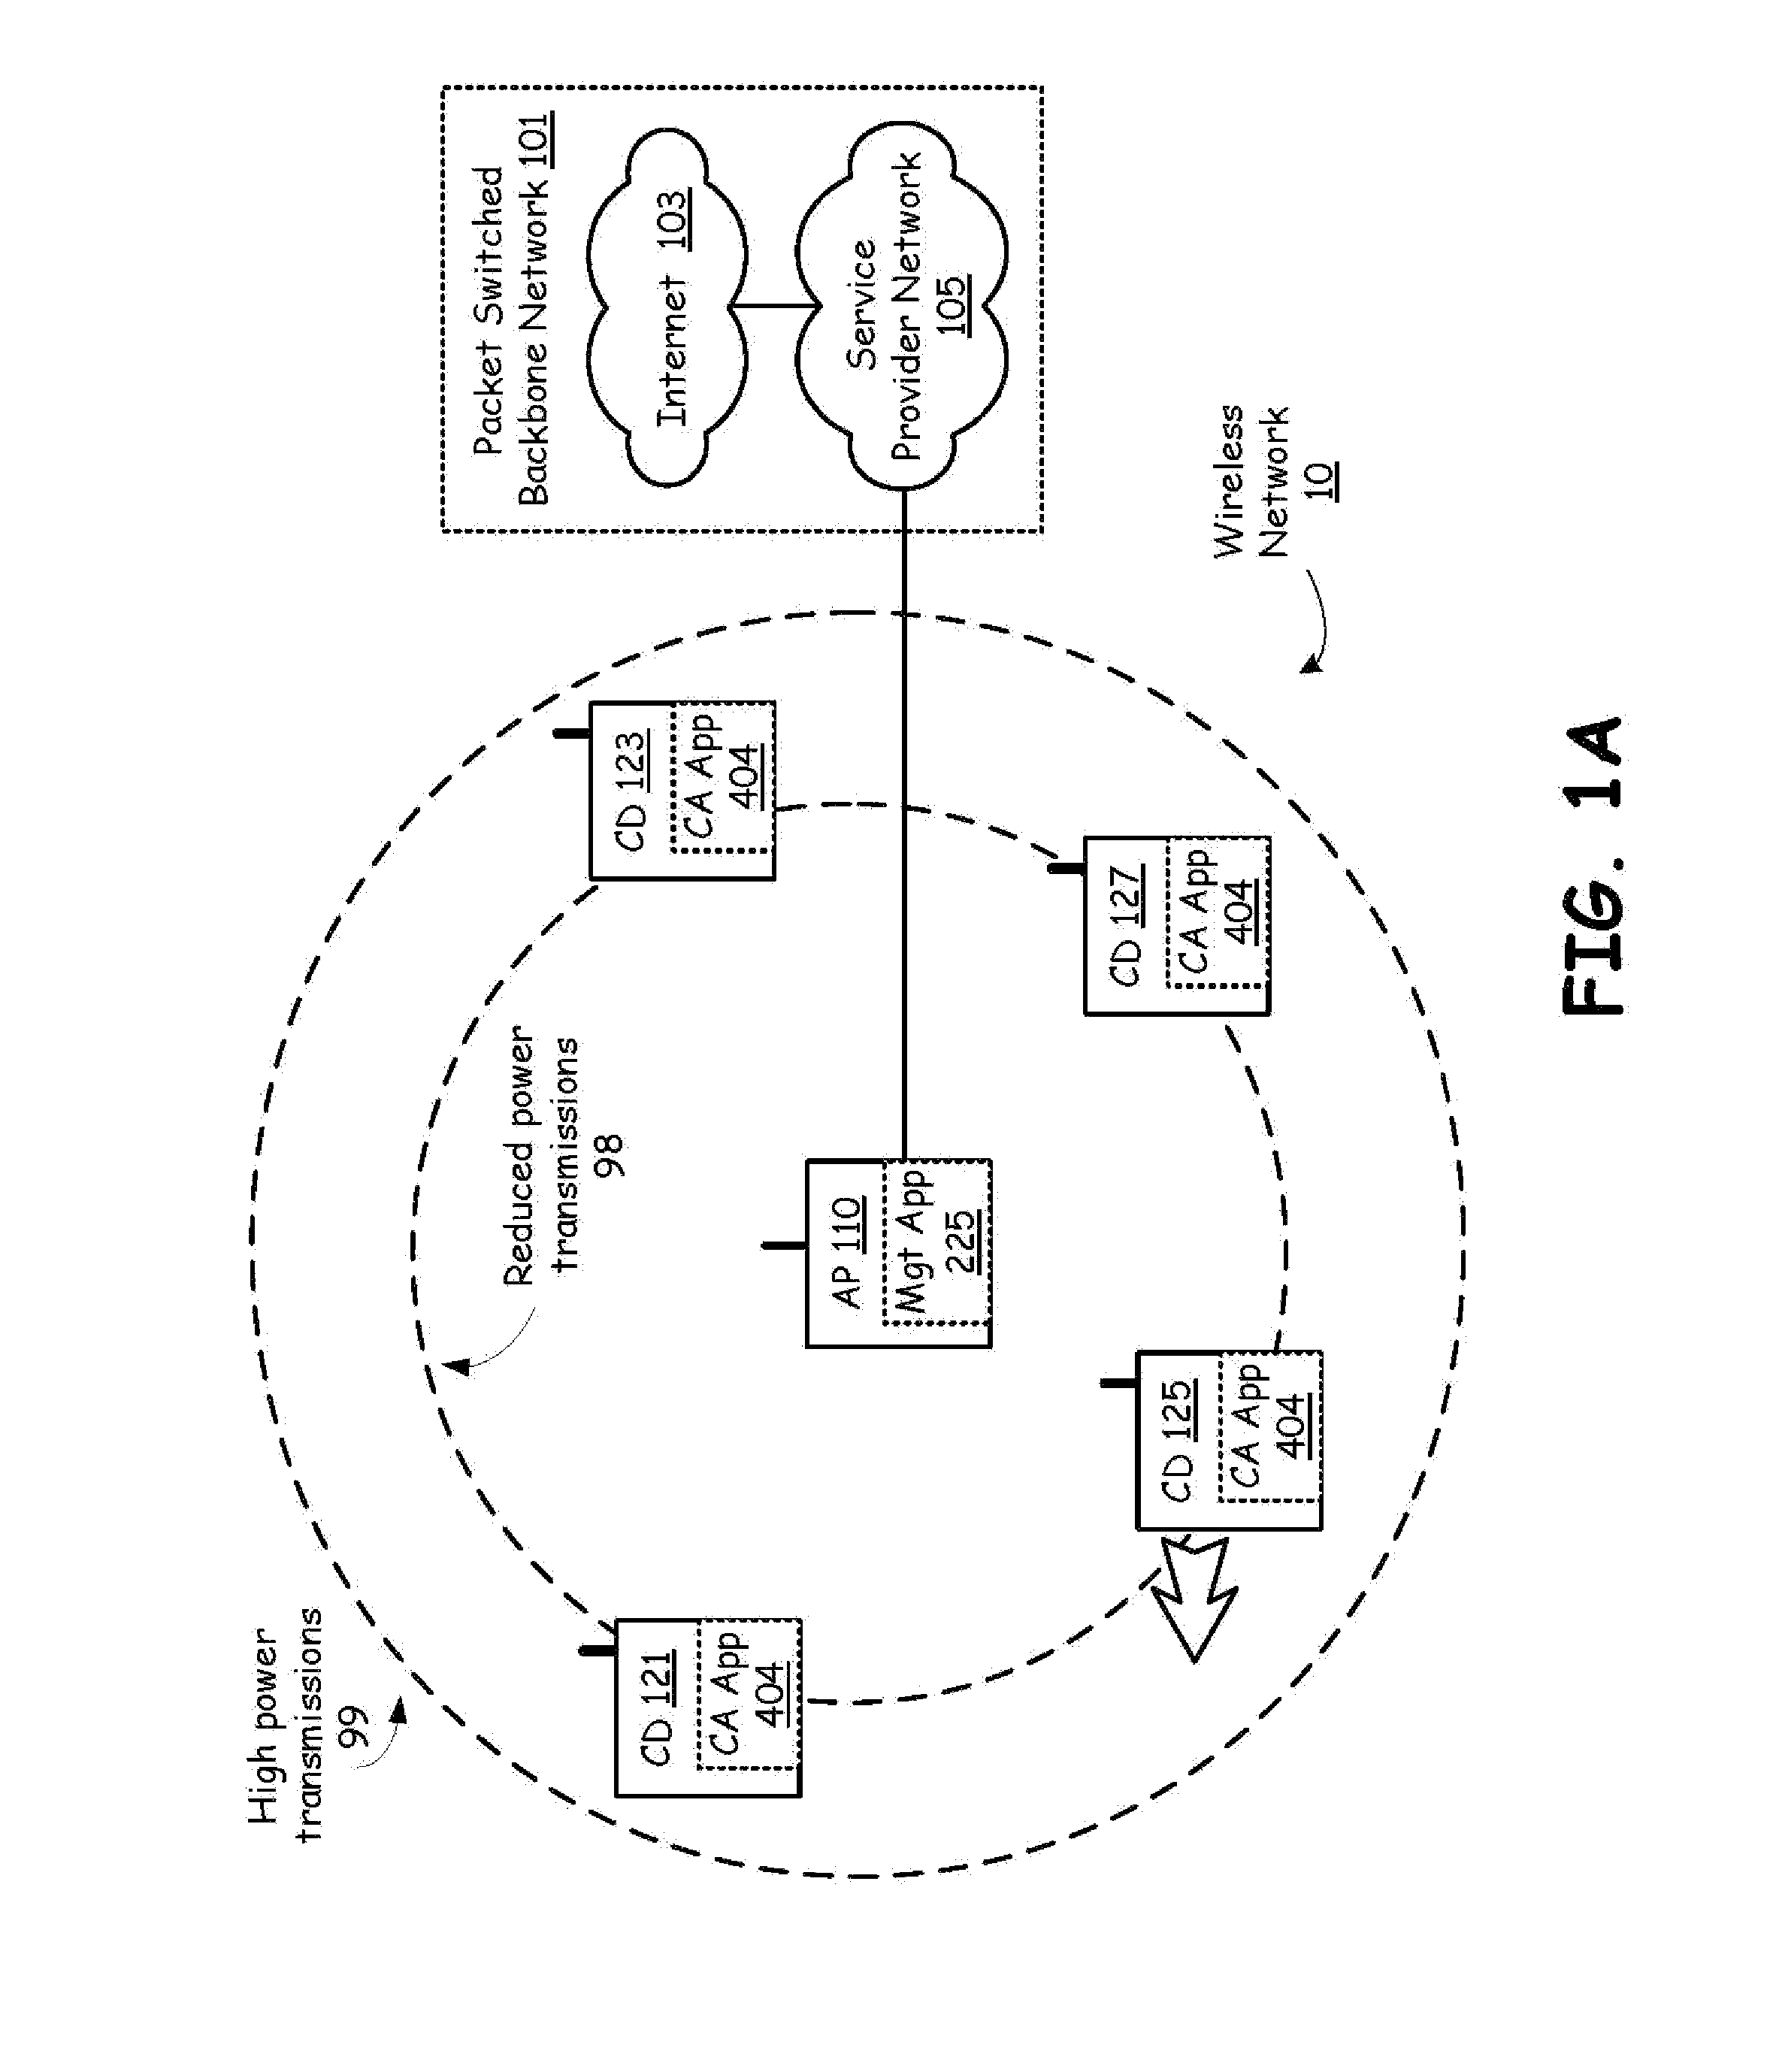 Interference parameter reporting from client devices to access point for use in modifying wireless operations